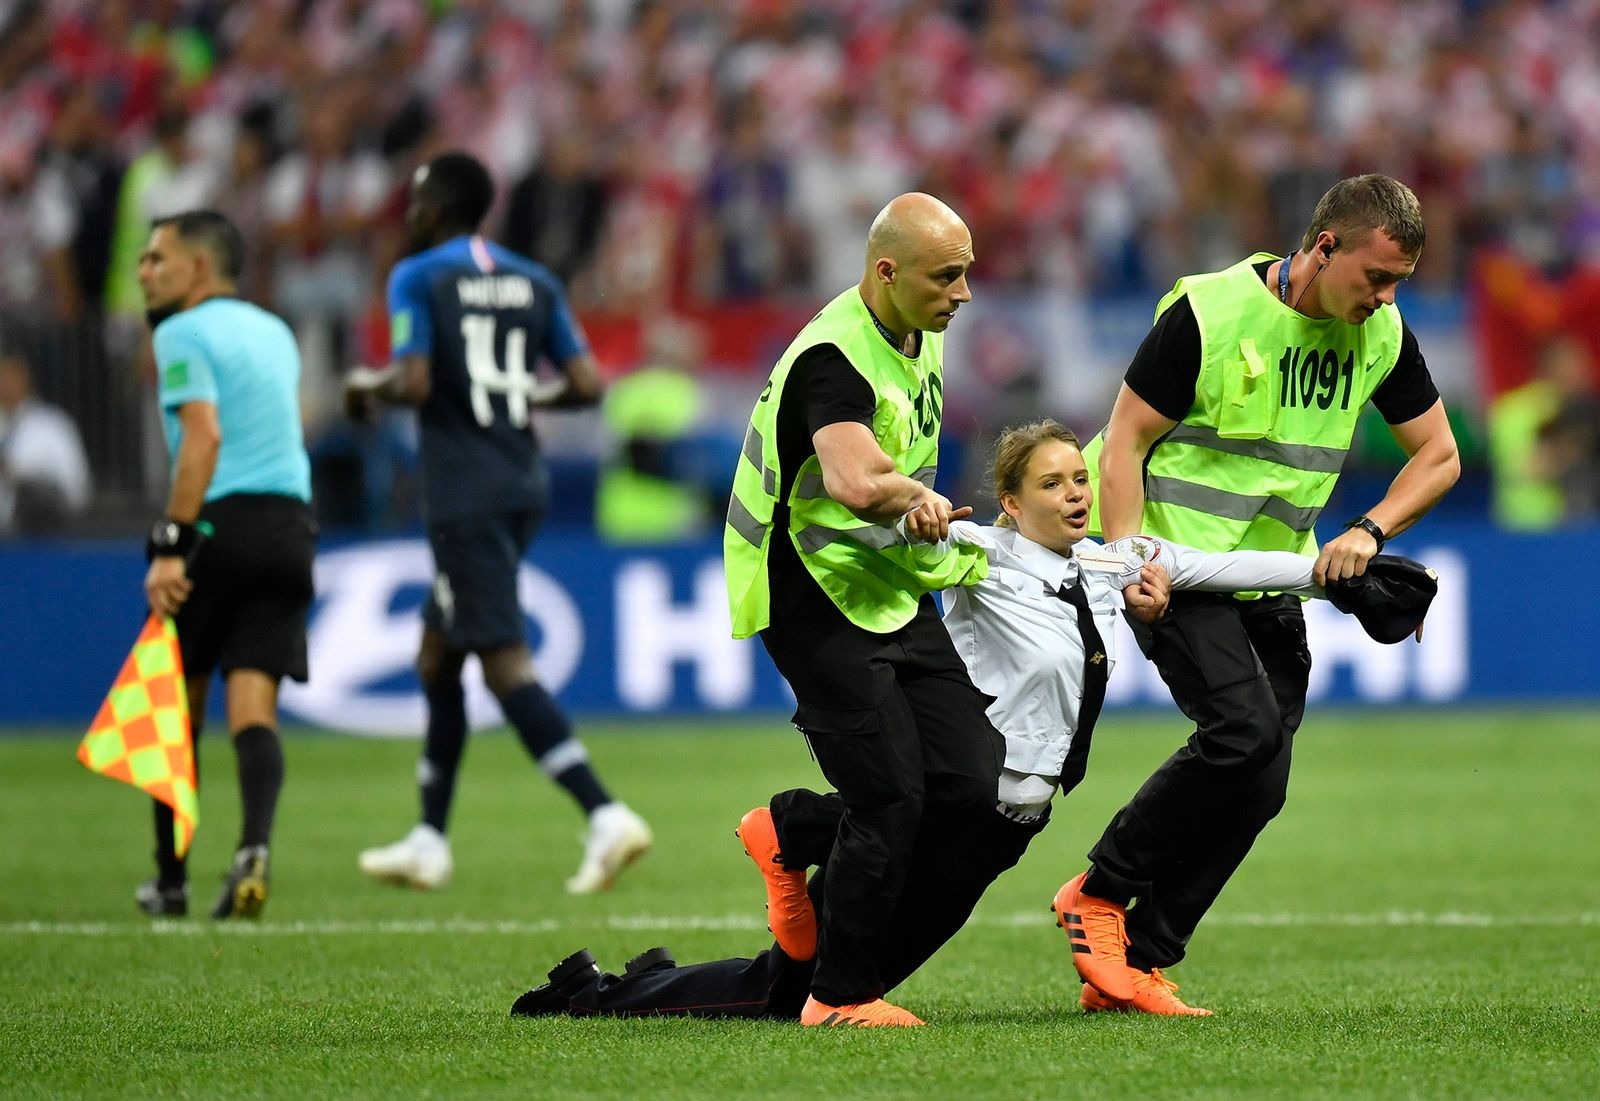 Stewards pull a woman off the pitch after she stormed onto the field and interrupted the final match between France and Croatia at the 2018 soccer World Cup in the Luzhniki Stadium in Moscow, Russia, Sunday, July 15, 2018. (AP Photo/Martin Meissner)